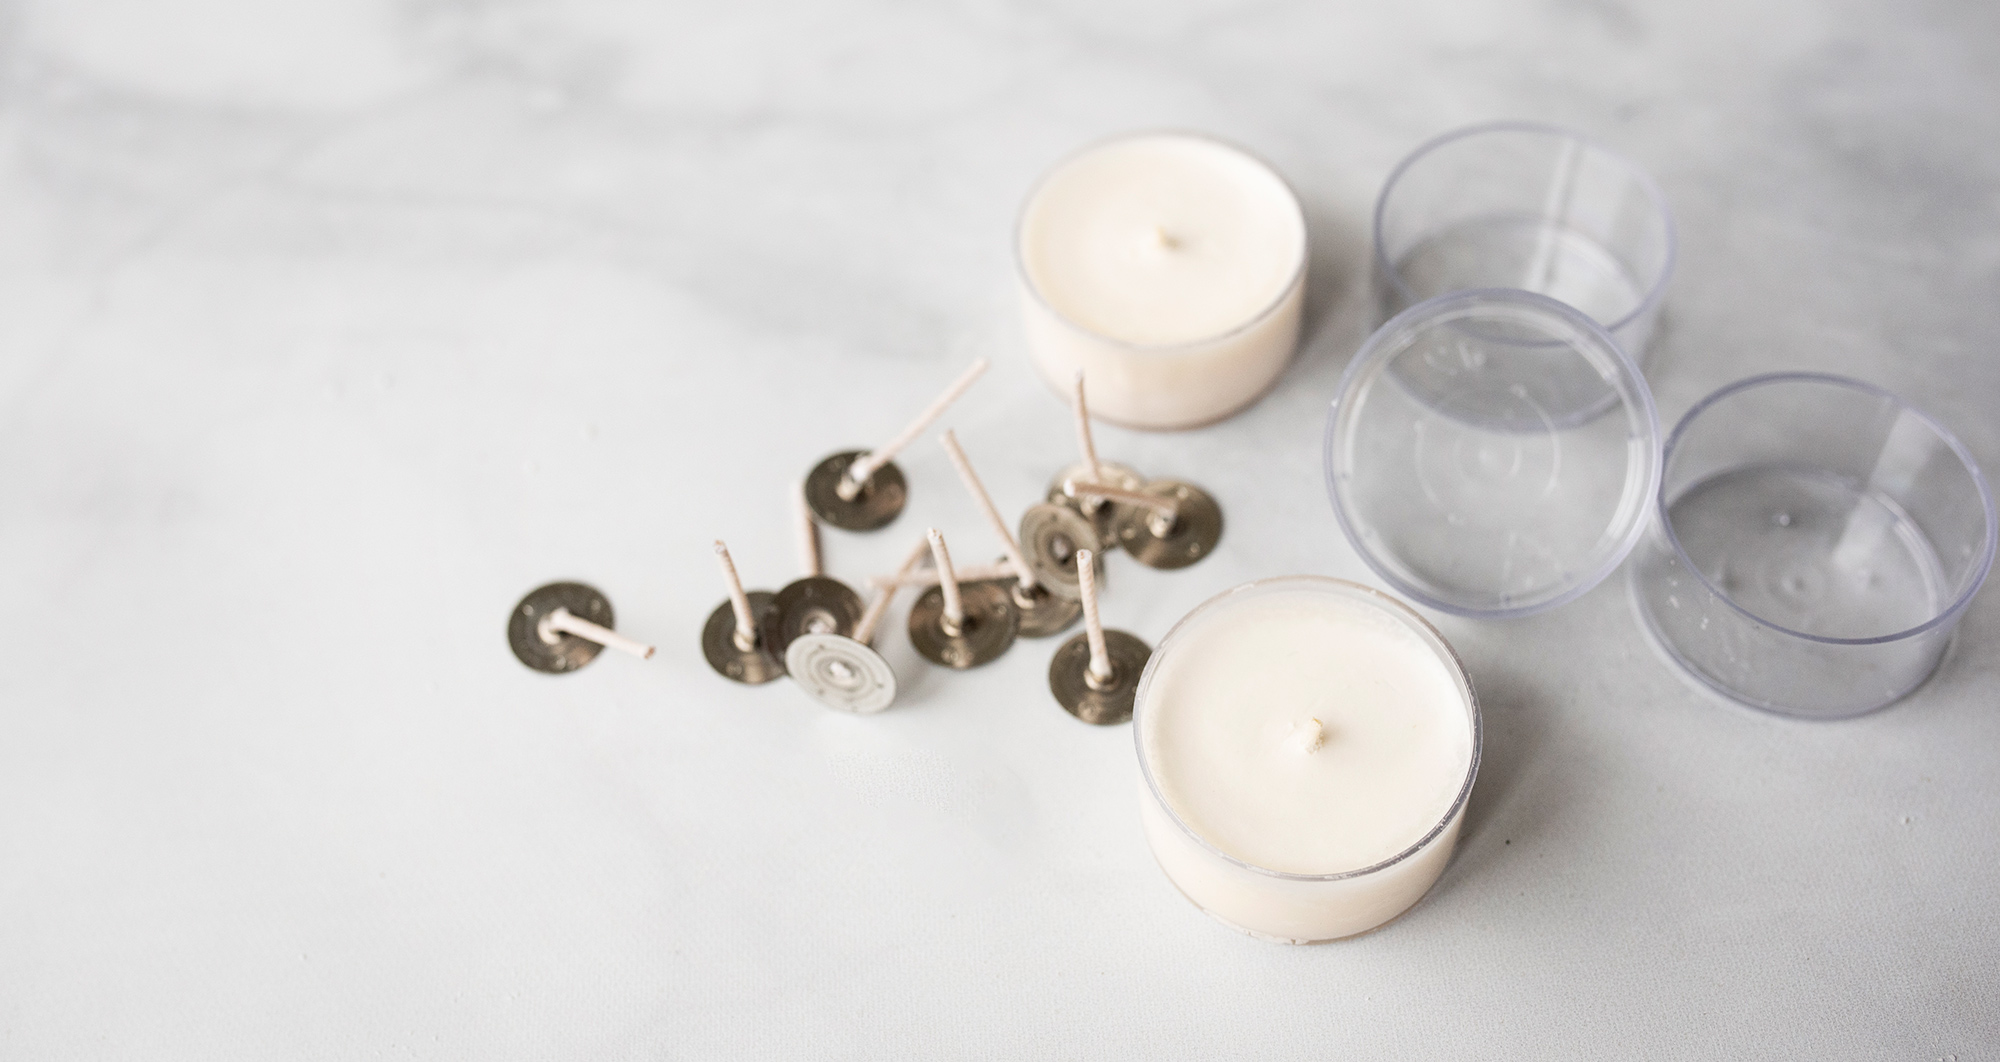 Tealight cups and wicks.